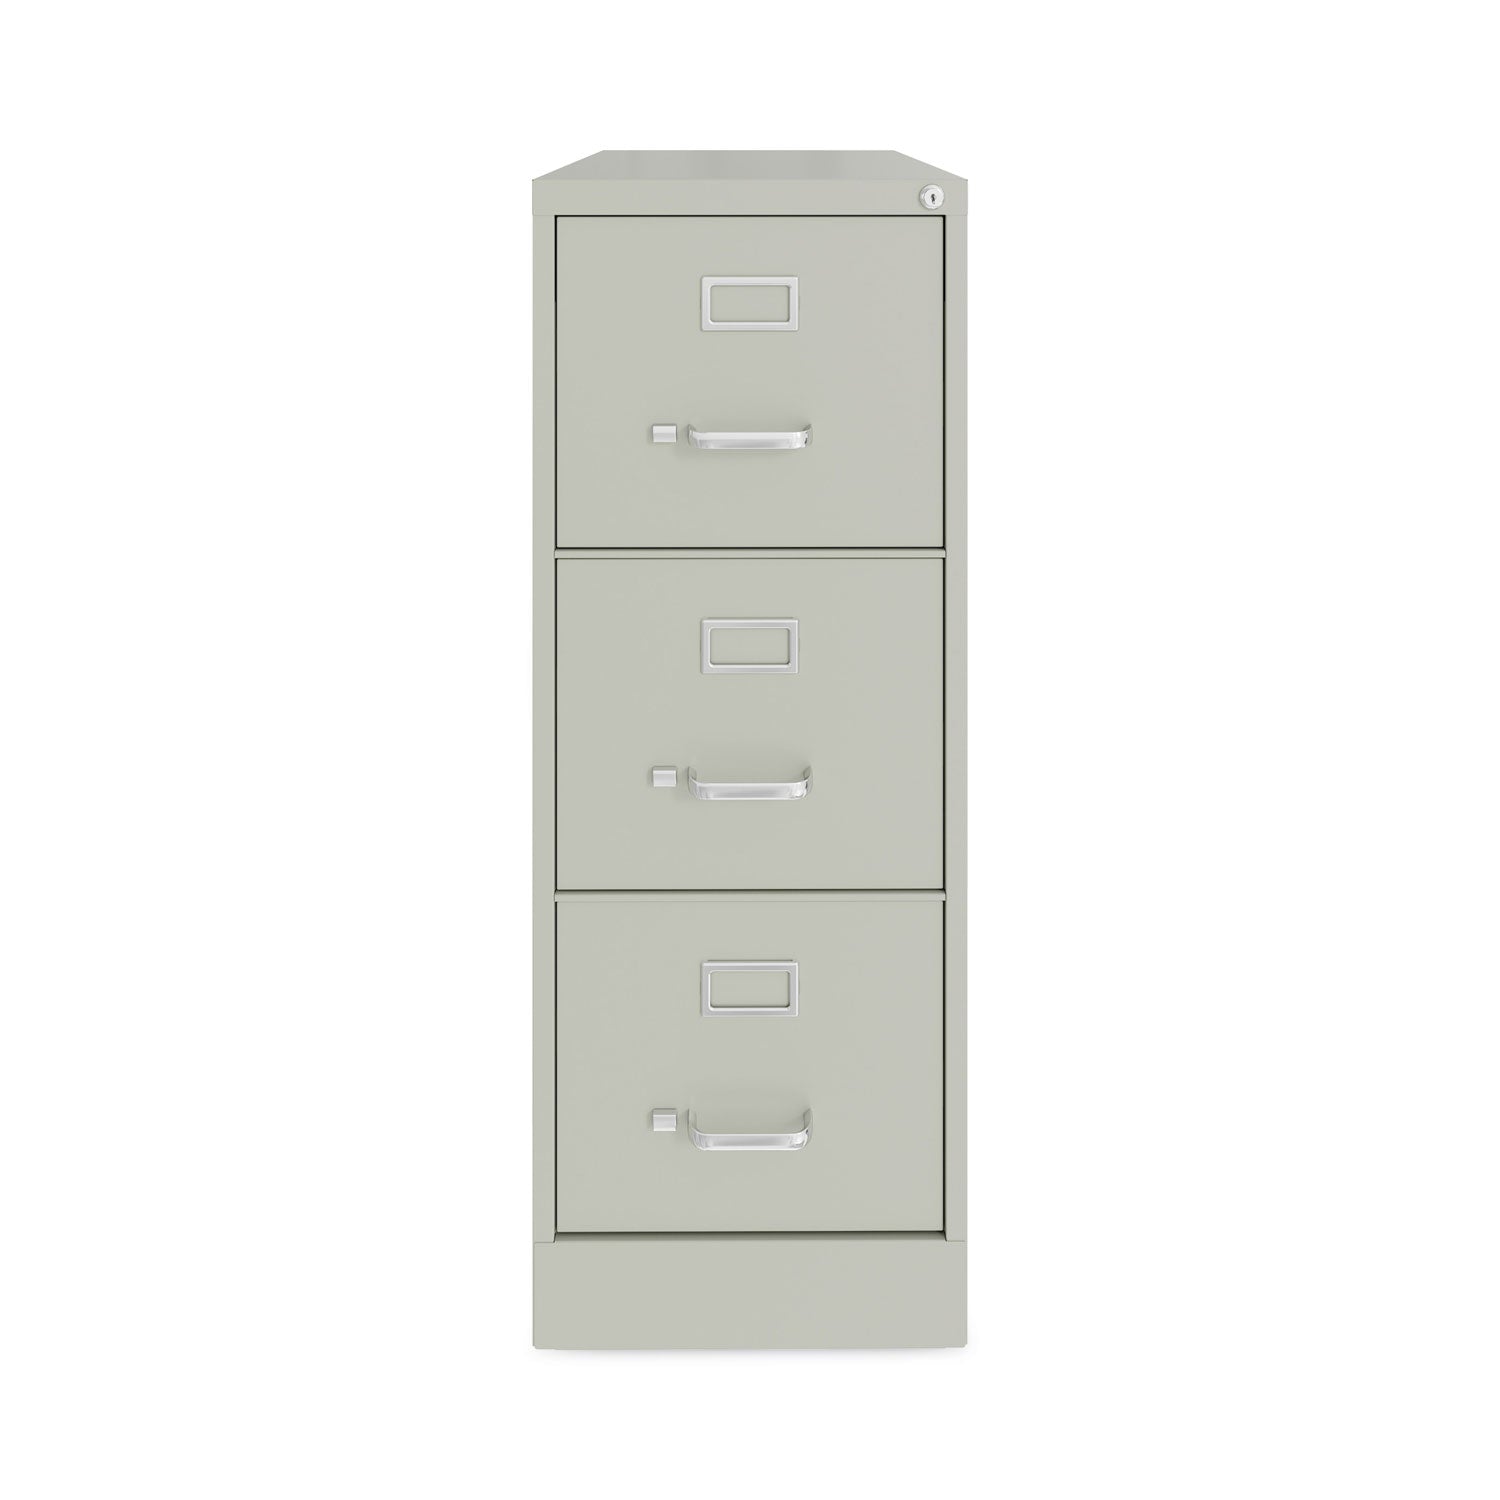 vertical-letter-file-cabinet-3-letter-size-file-drawers-light-gray-15-x-22-x-4019_hid24857 - 1